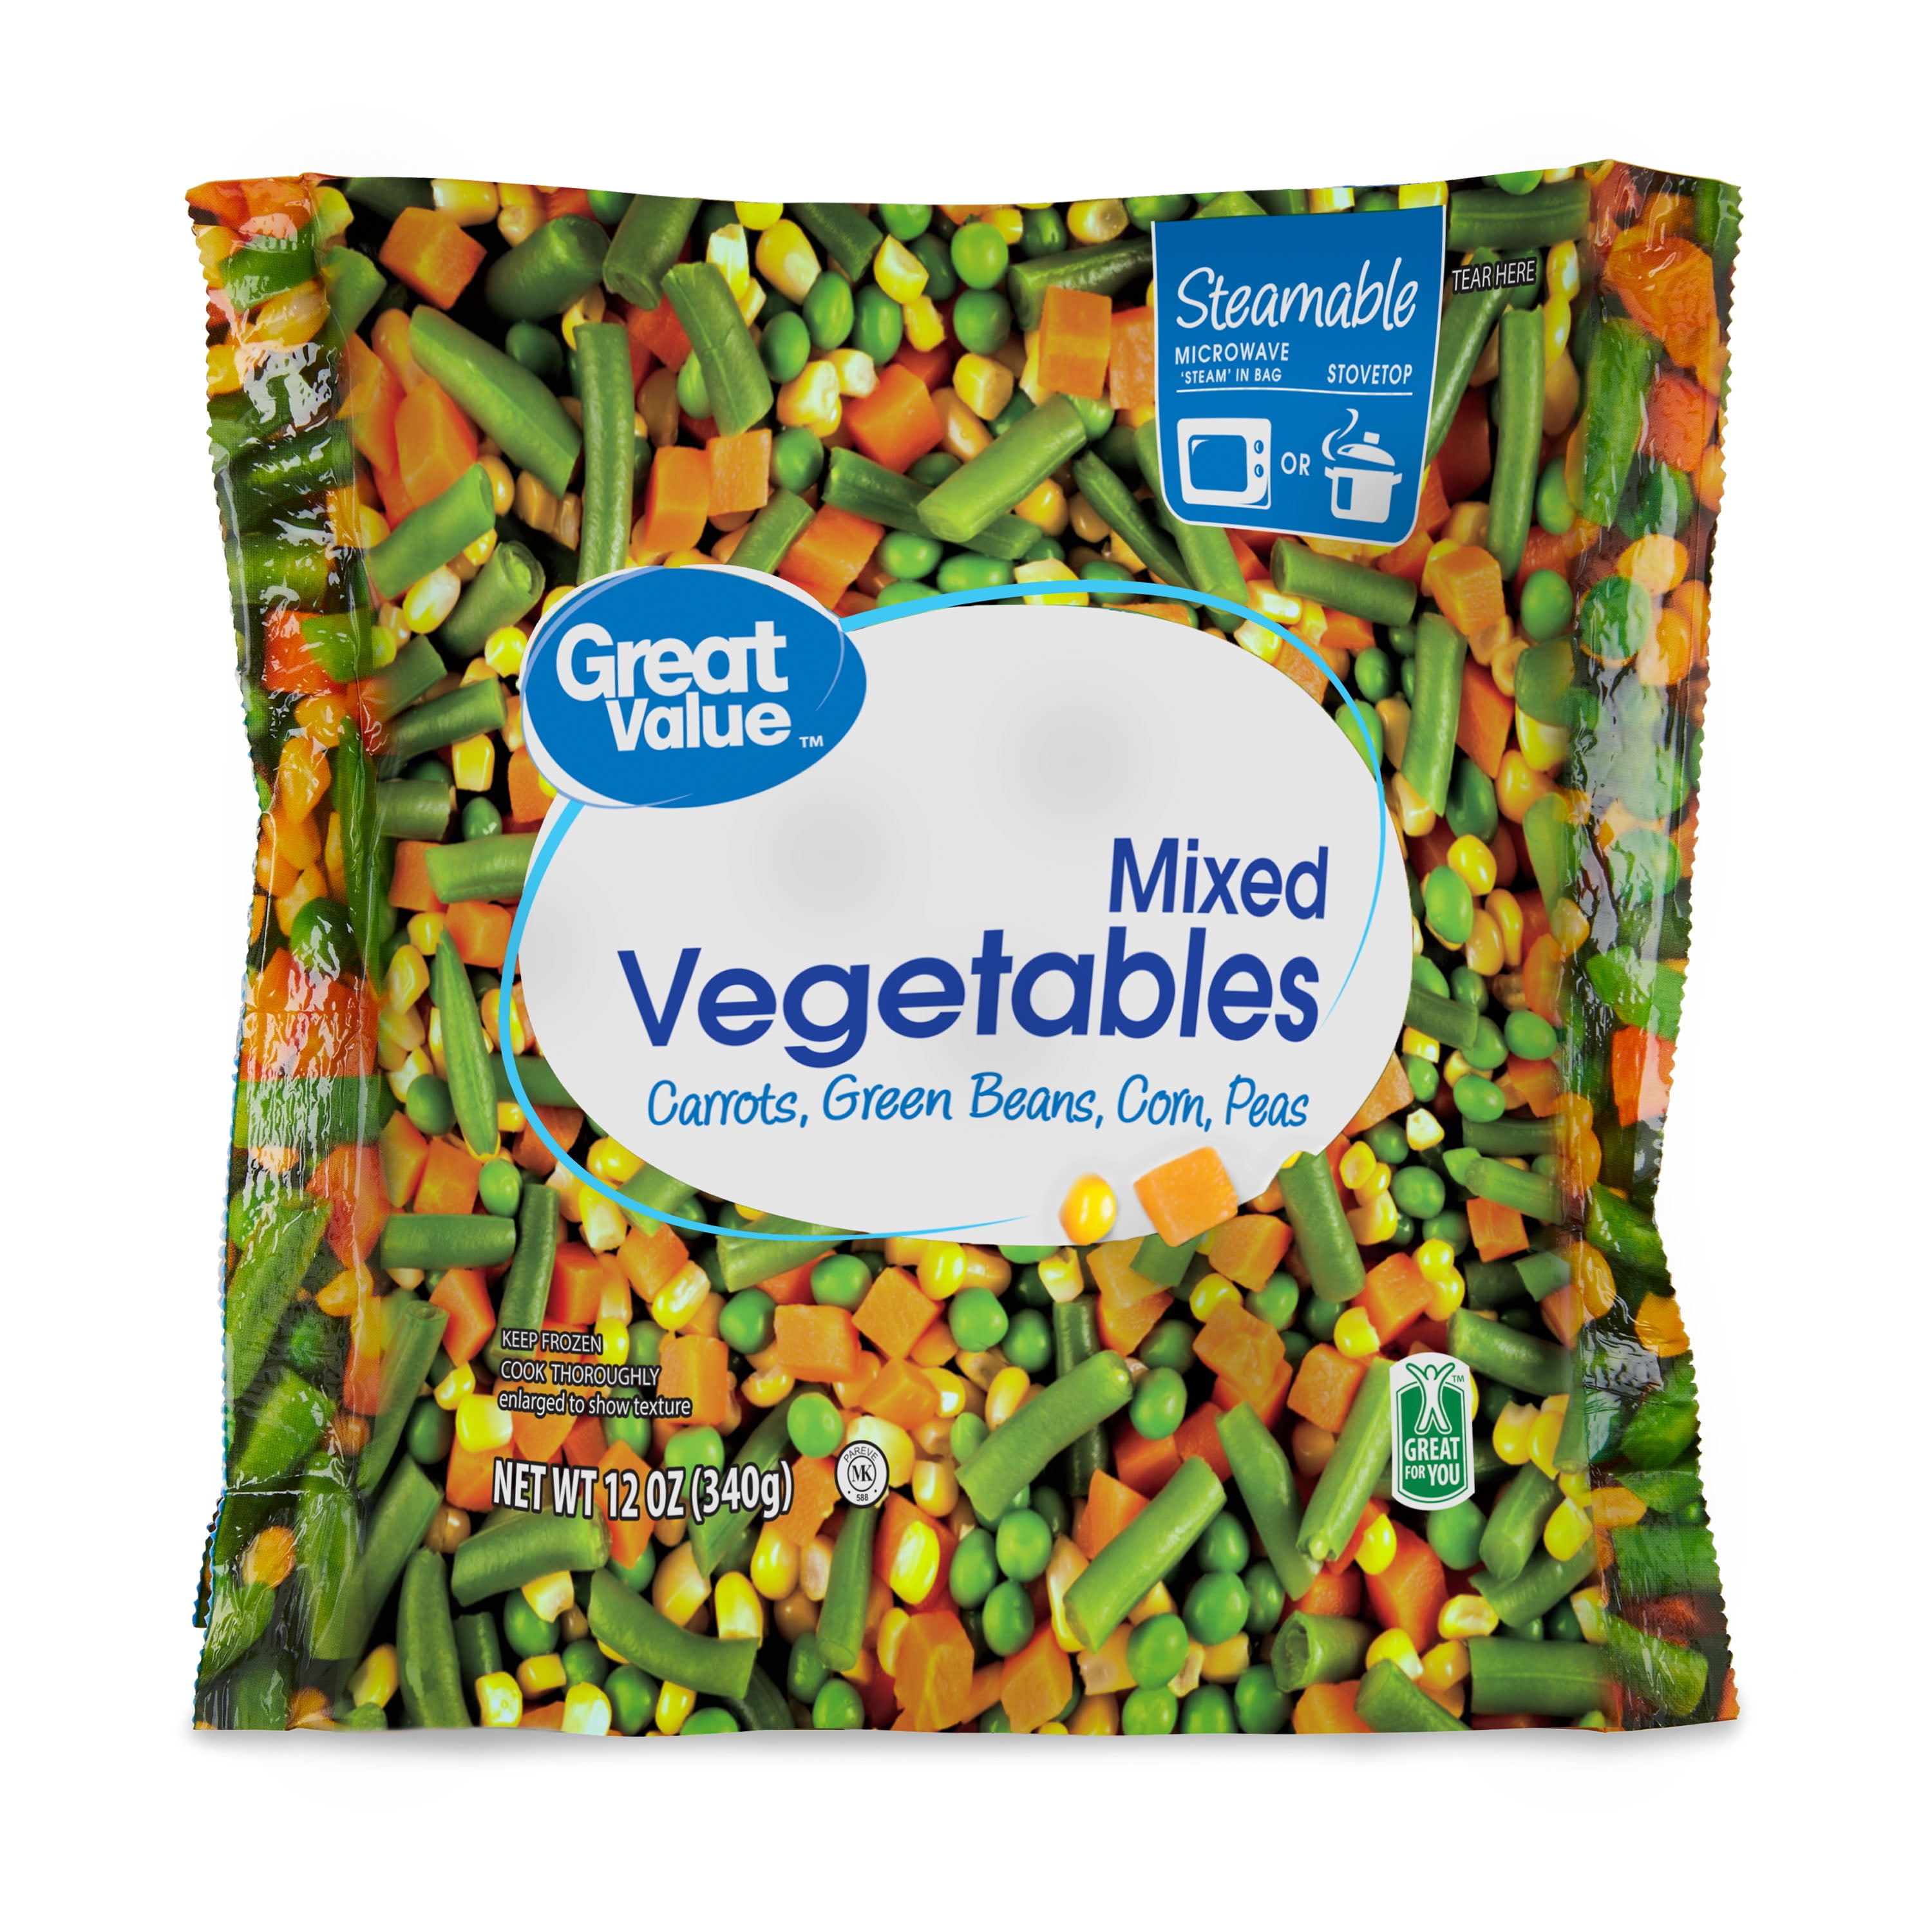 Great Value Steamable Mixed Vegetables, Frozen, 12 oz